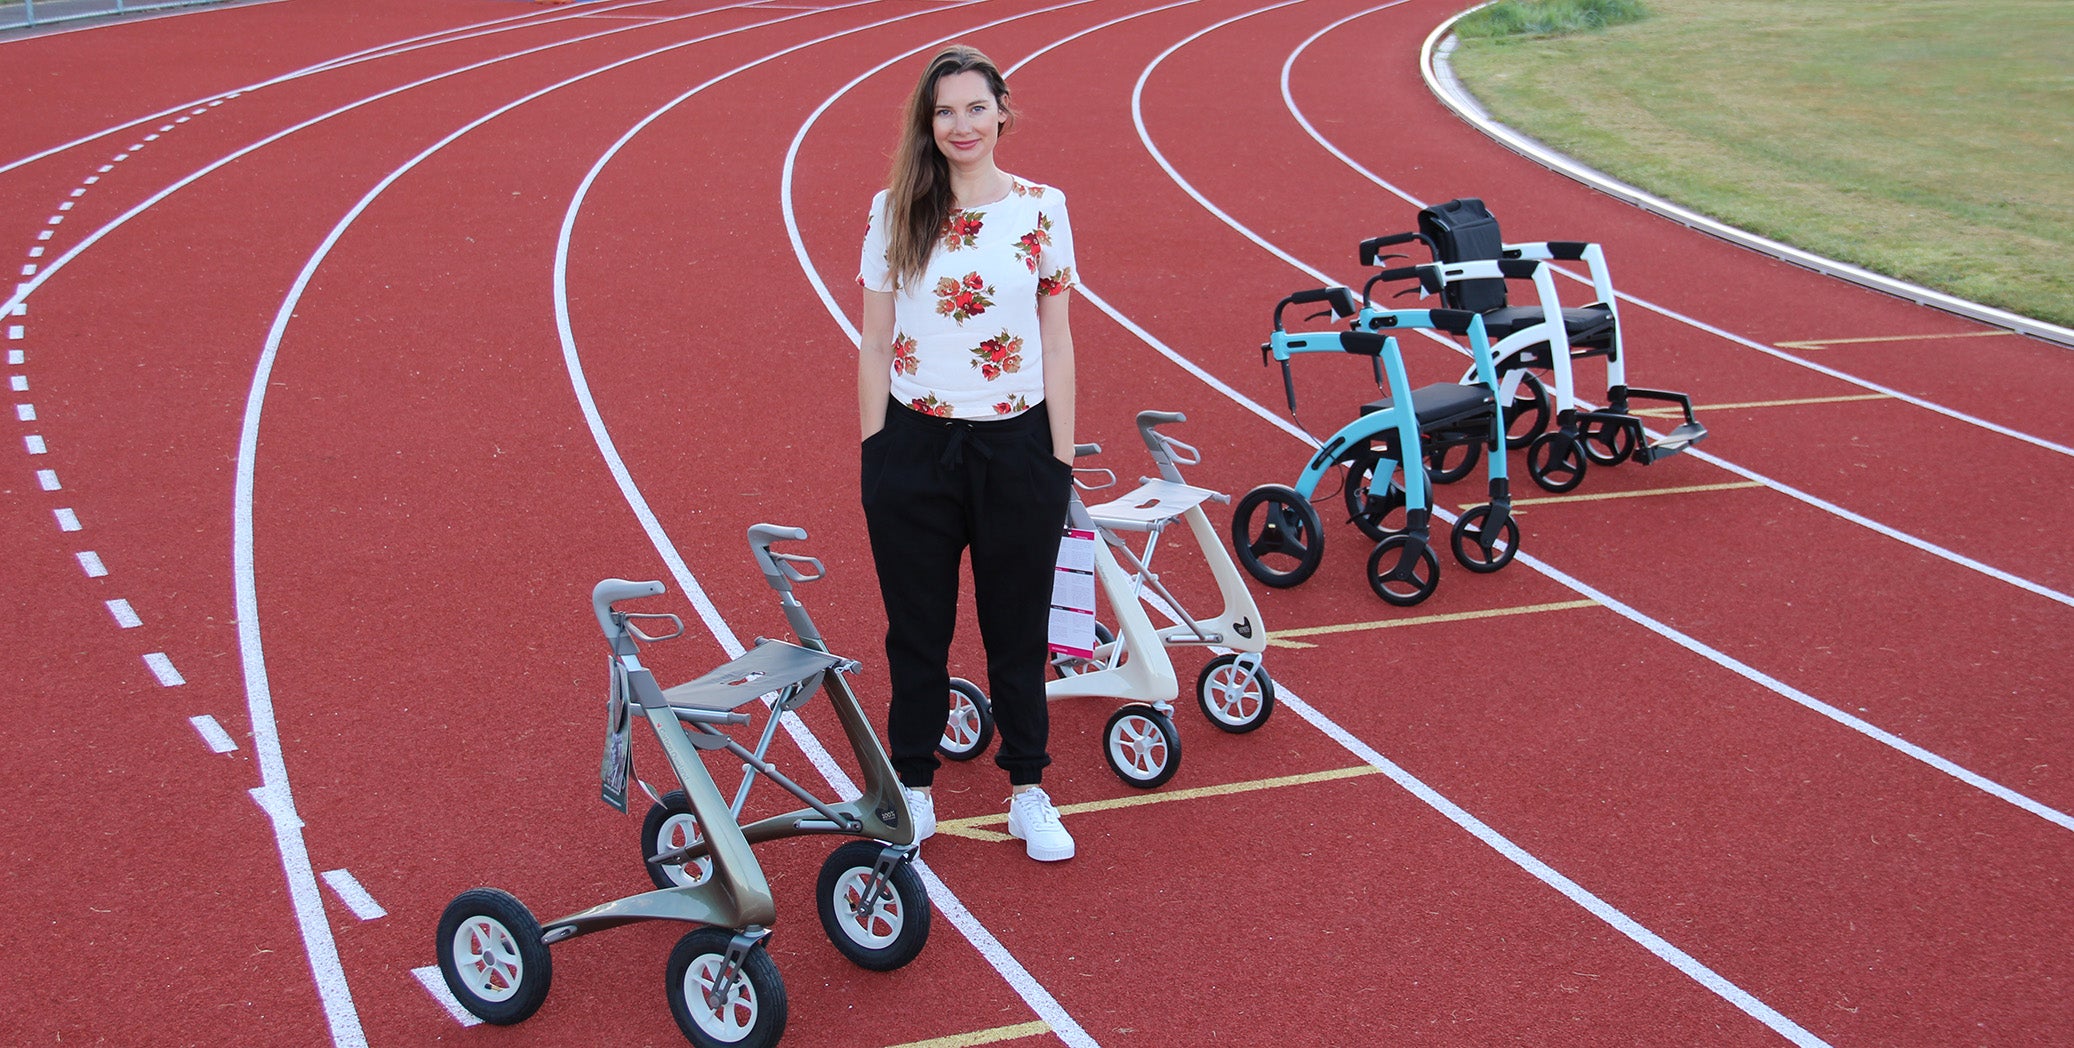 Anna Wallace stands on a running track with four modern walking frames on display.